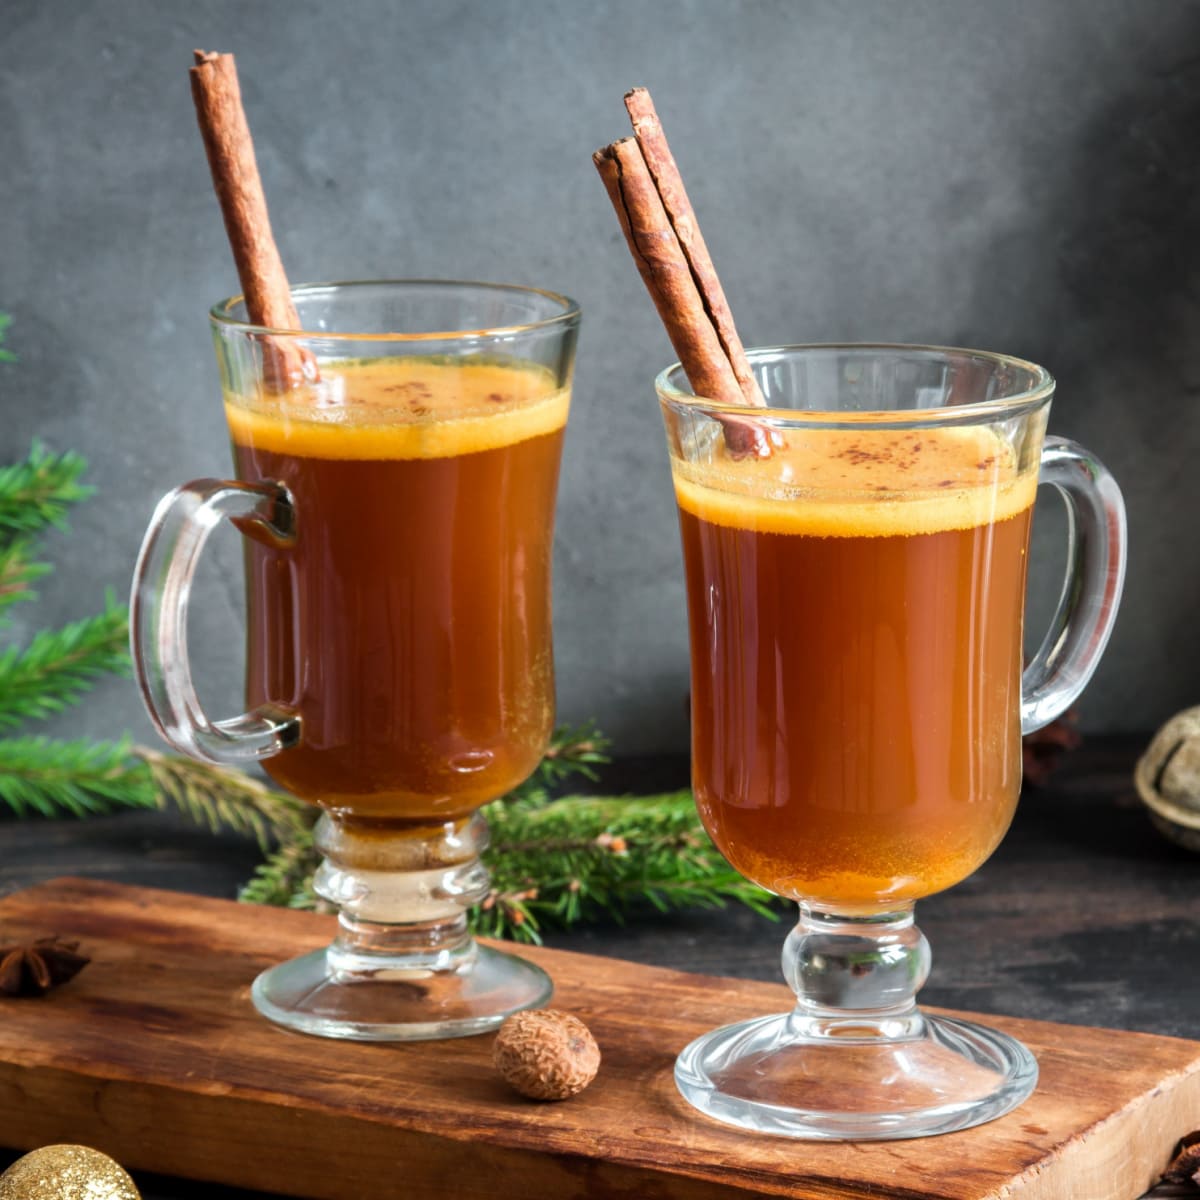 Two Mug Glasses of Hot Buttered Rum with a cinnamon Stick Garnish on a Wooden Board